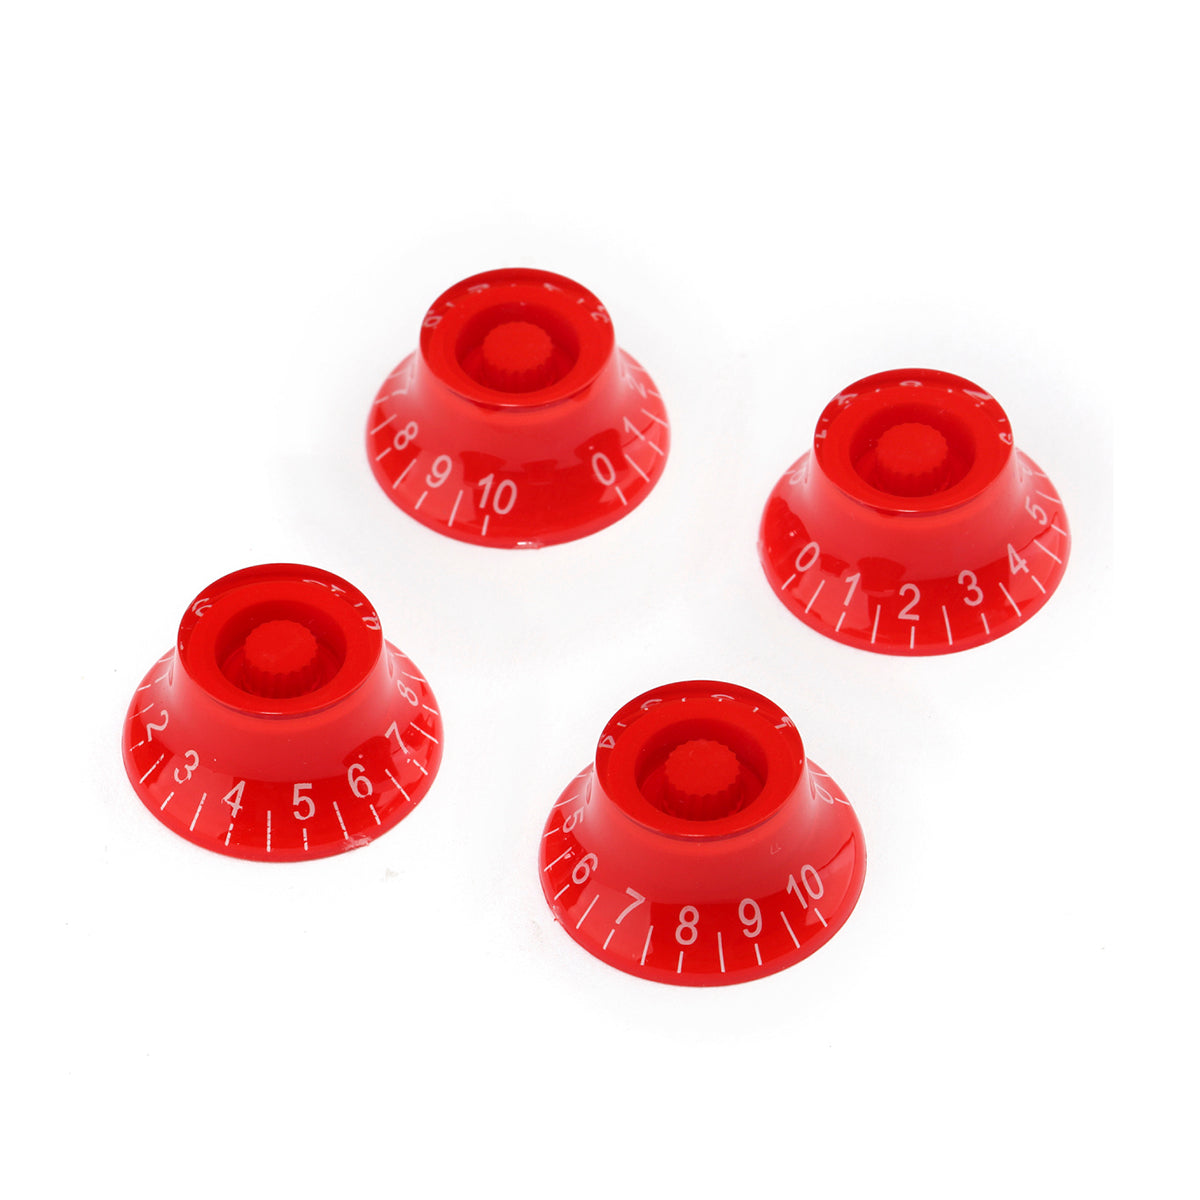 Musiclily Metric 6mm Top Hat LP Style Guitar Speed Control Knobs,Red with White Number(5 Pieces)